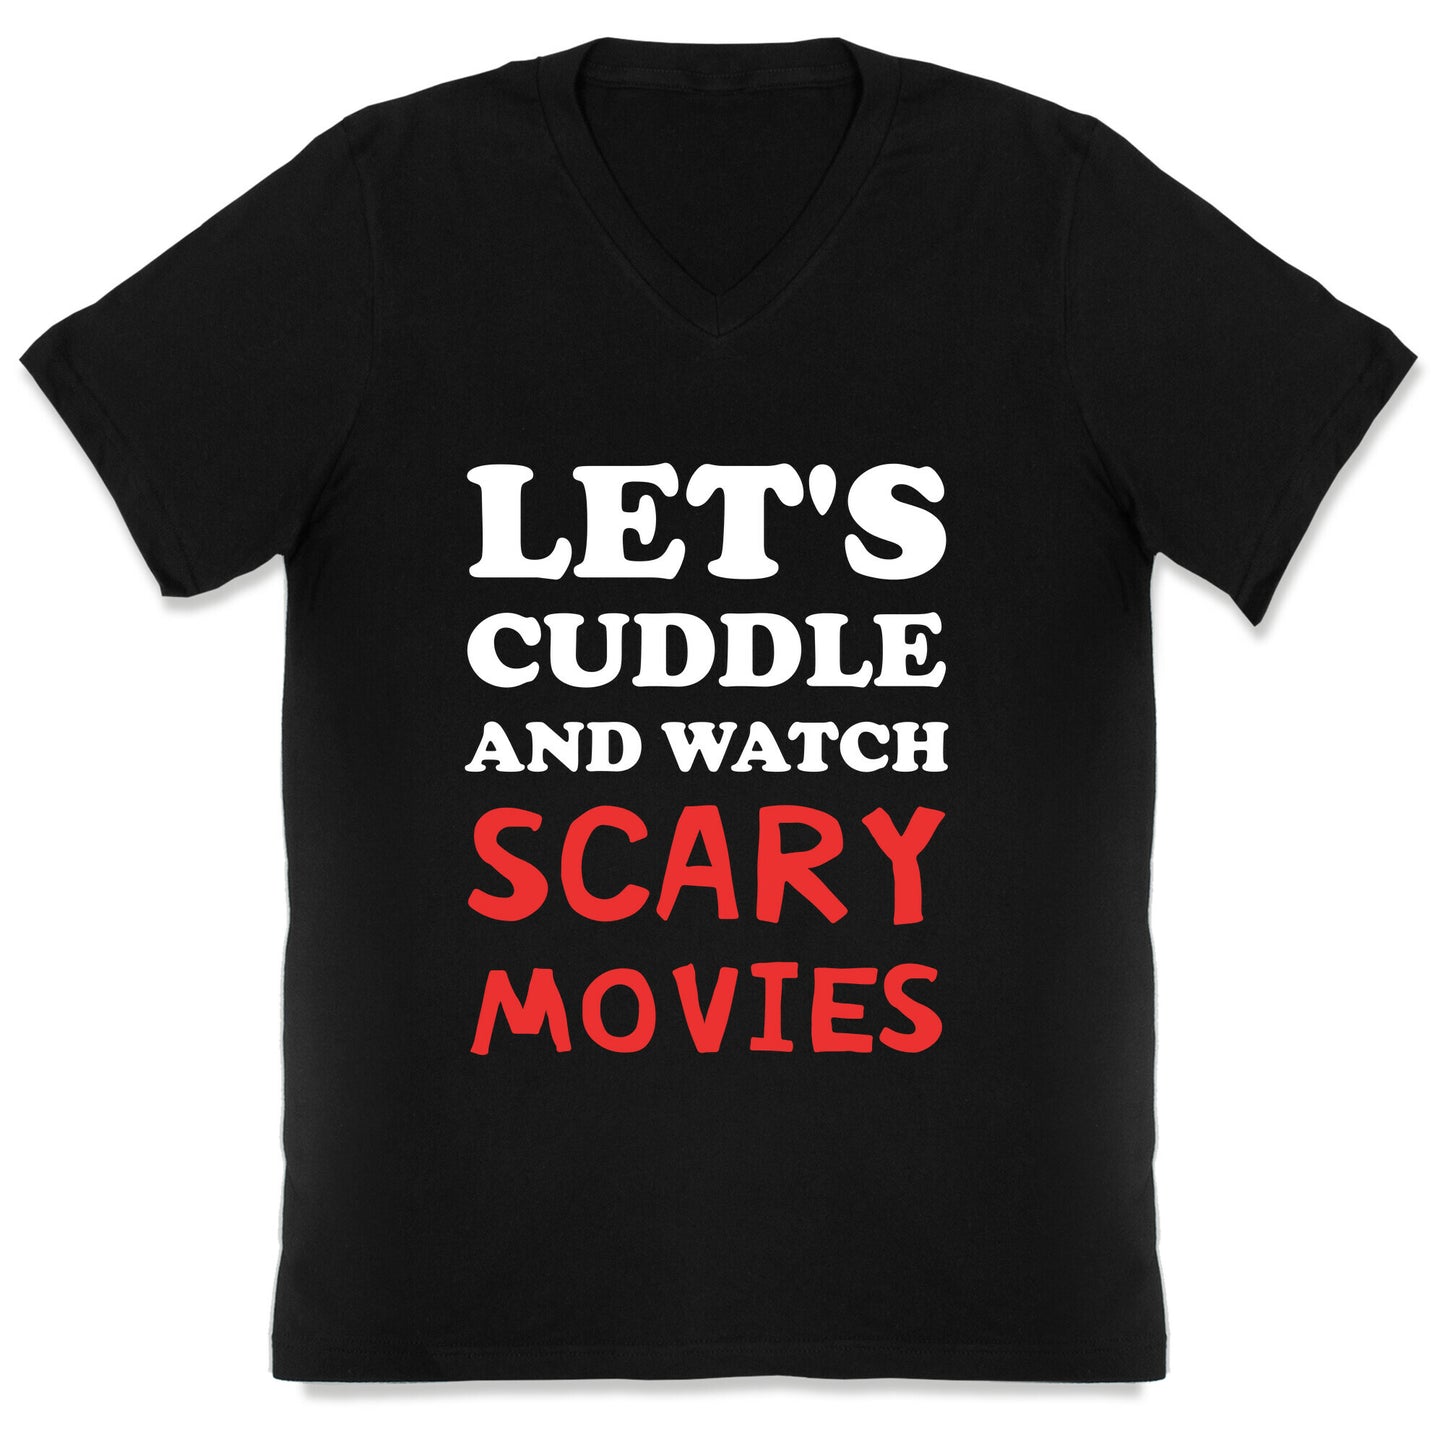 Let's Cuddle And Watch Scary Movies V-Neck